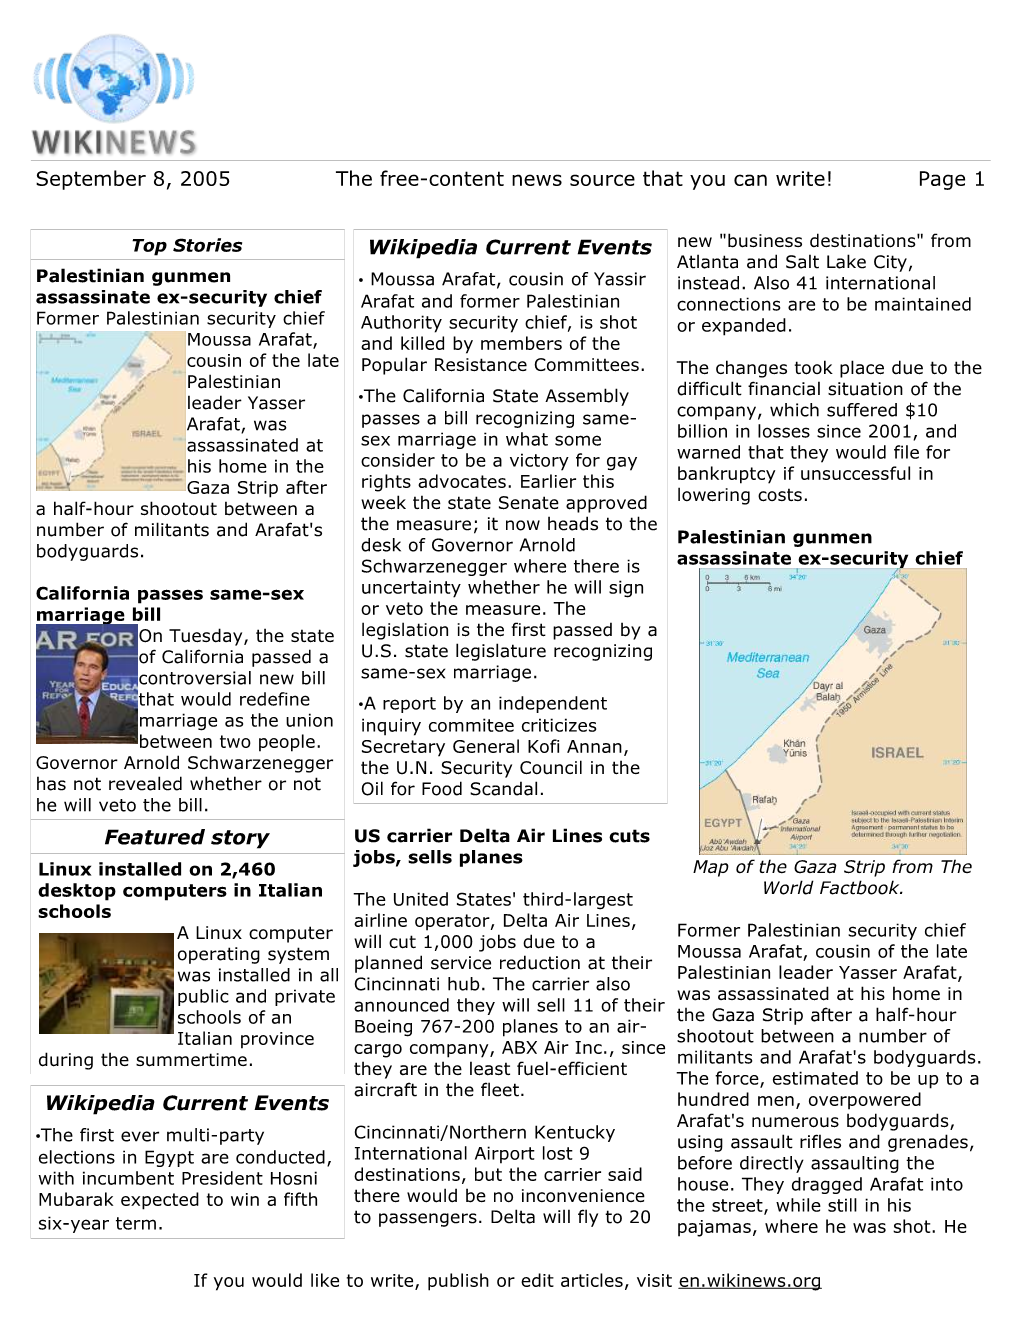 September 8, 2005 the Free-Content News Source That You Can Write! Page 1